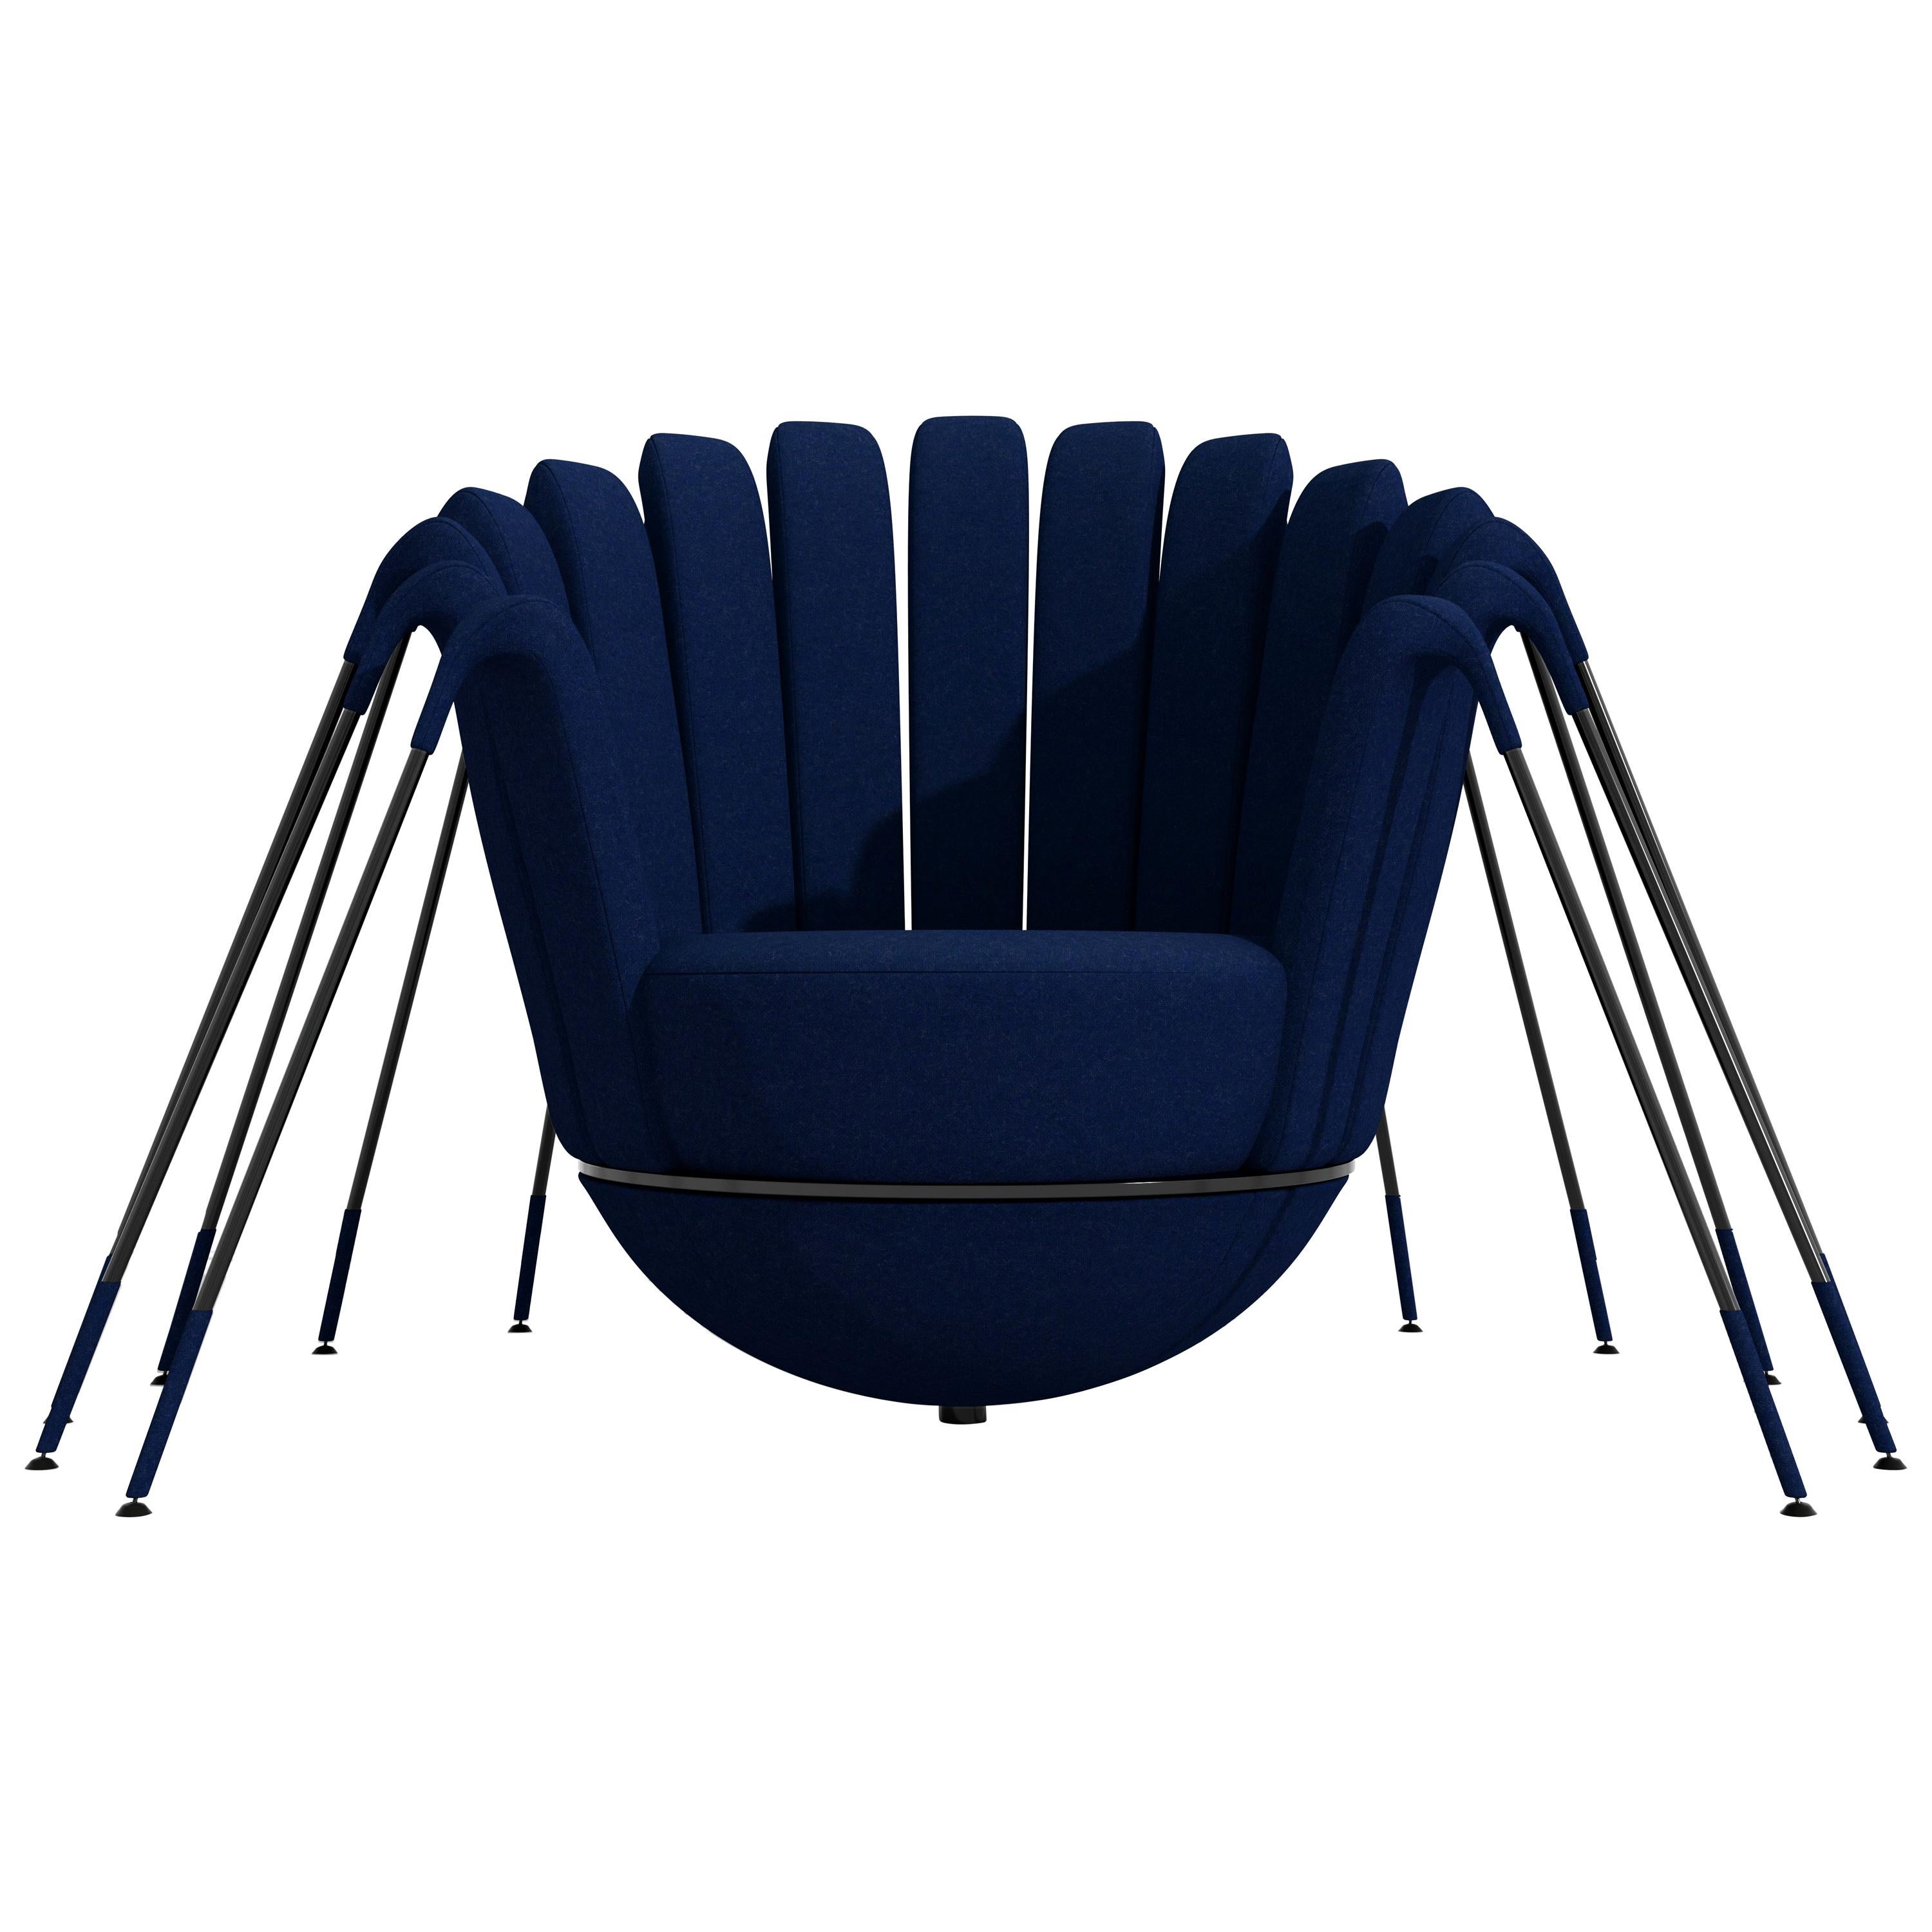 Les Araignée Armchair by Marc Ange with Black Legs and Blue Velvet Upholstery For Sale